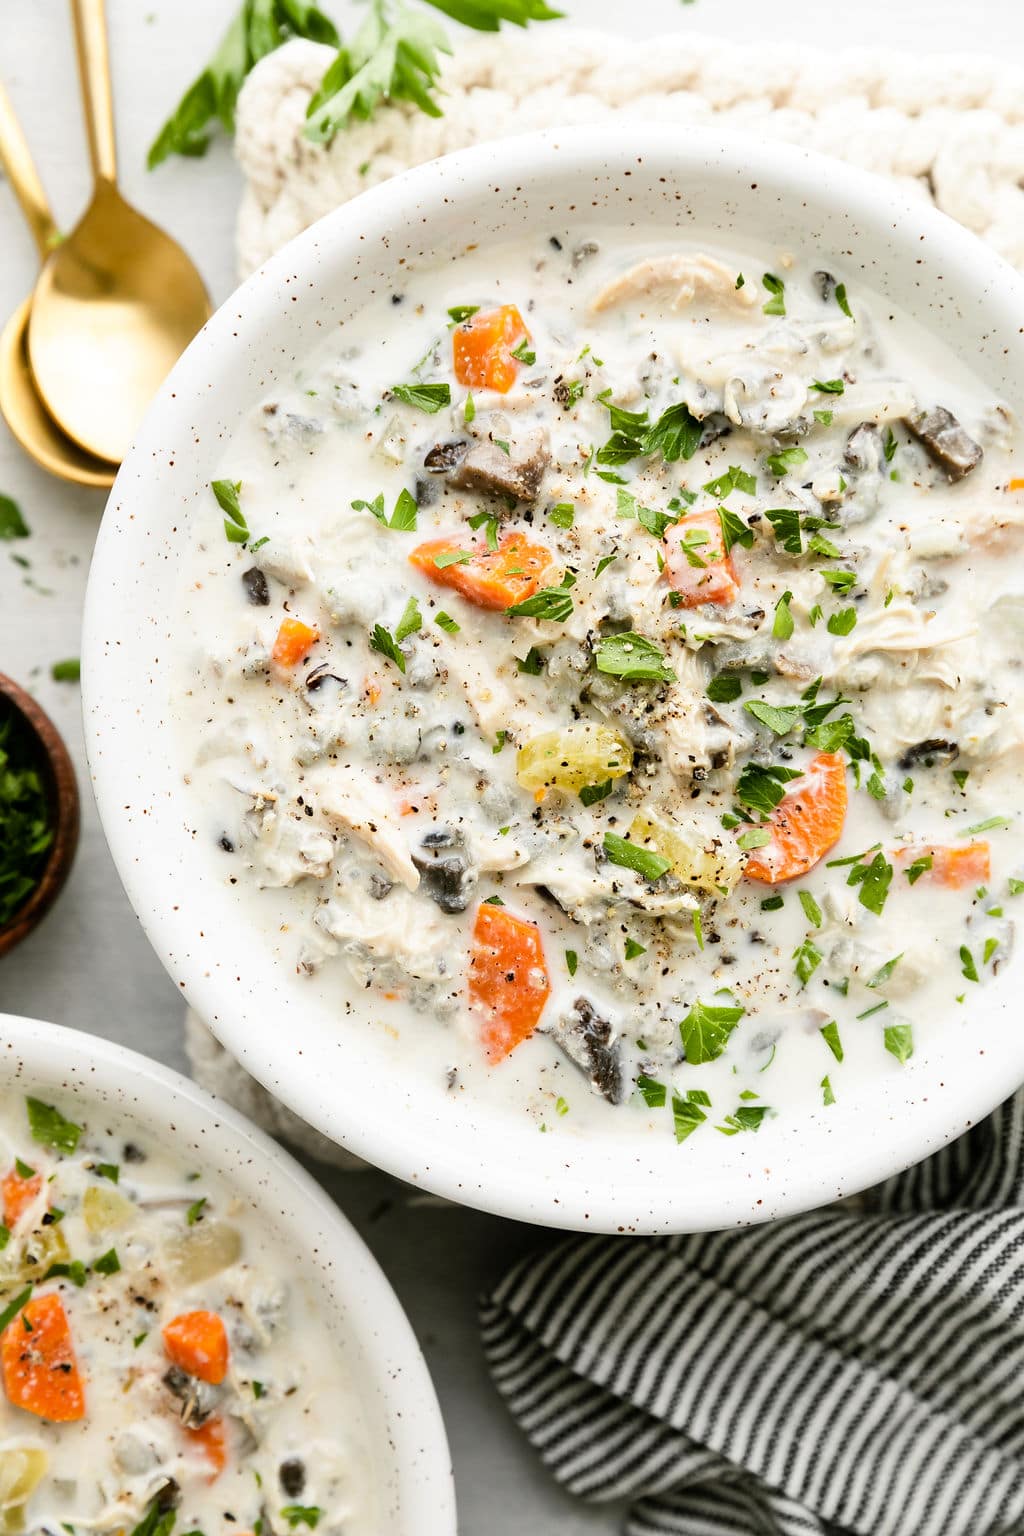 https://therealfooddietitians.com/wp-content/uploads/2019/02/Slow-Cooker-Chicken-Wild-Rice-Soup-5.jpg